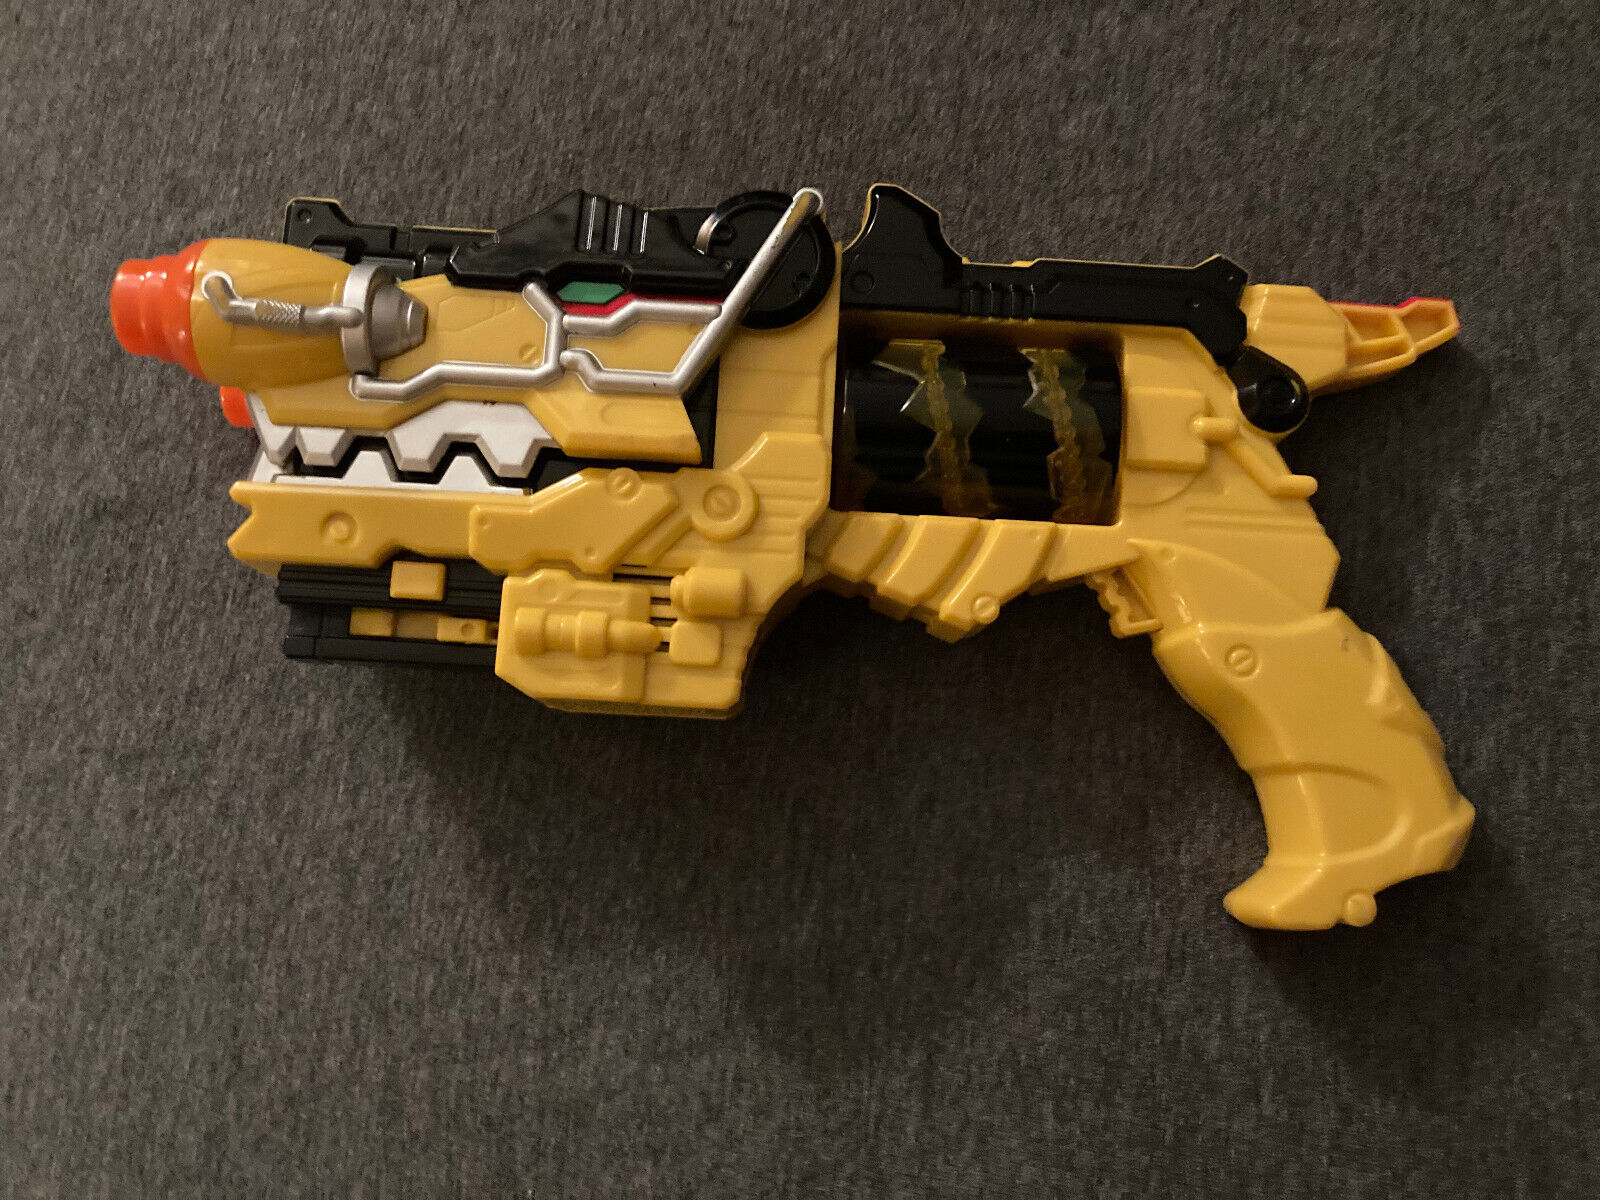 Bandai Power Rangers Dino Super Charge Deluxe Charger Gun Blaster (Working)